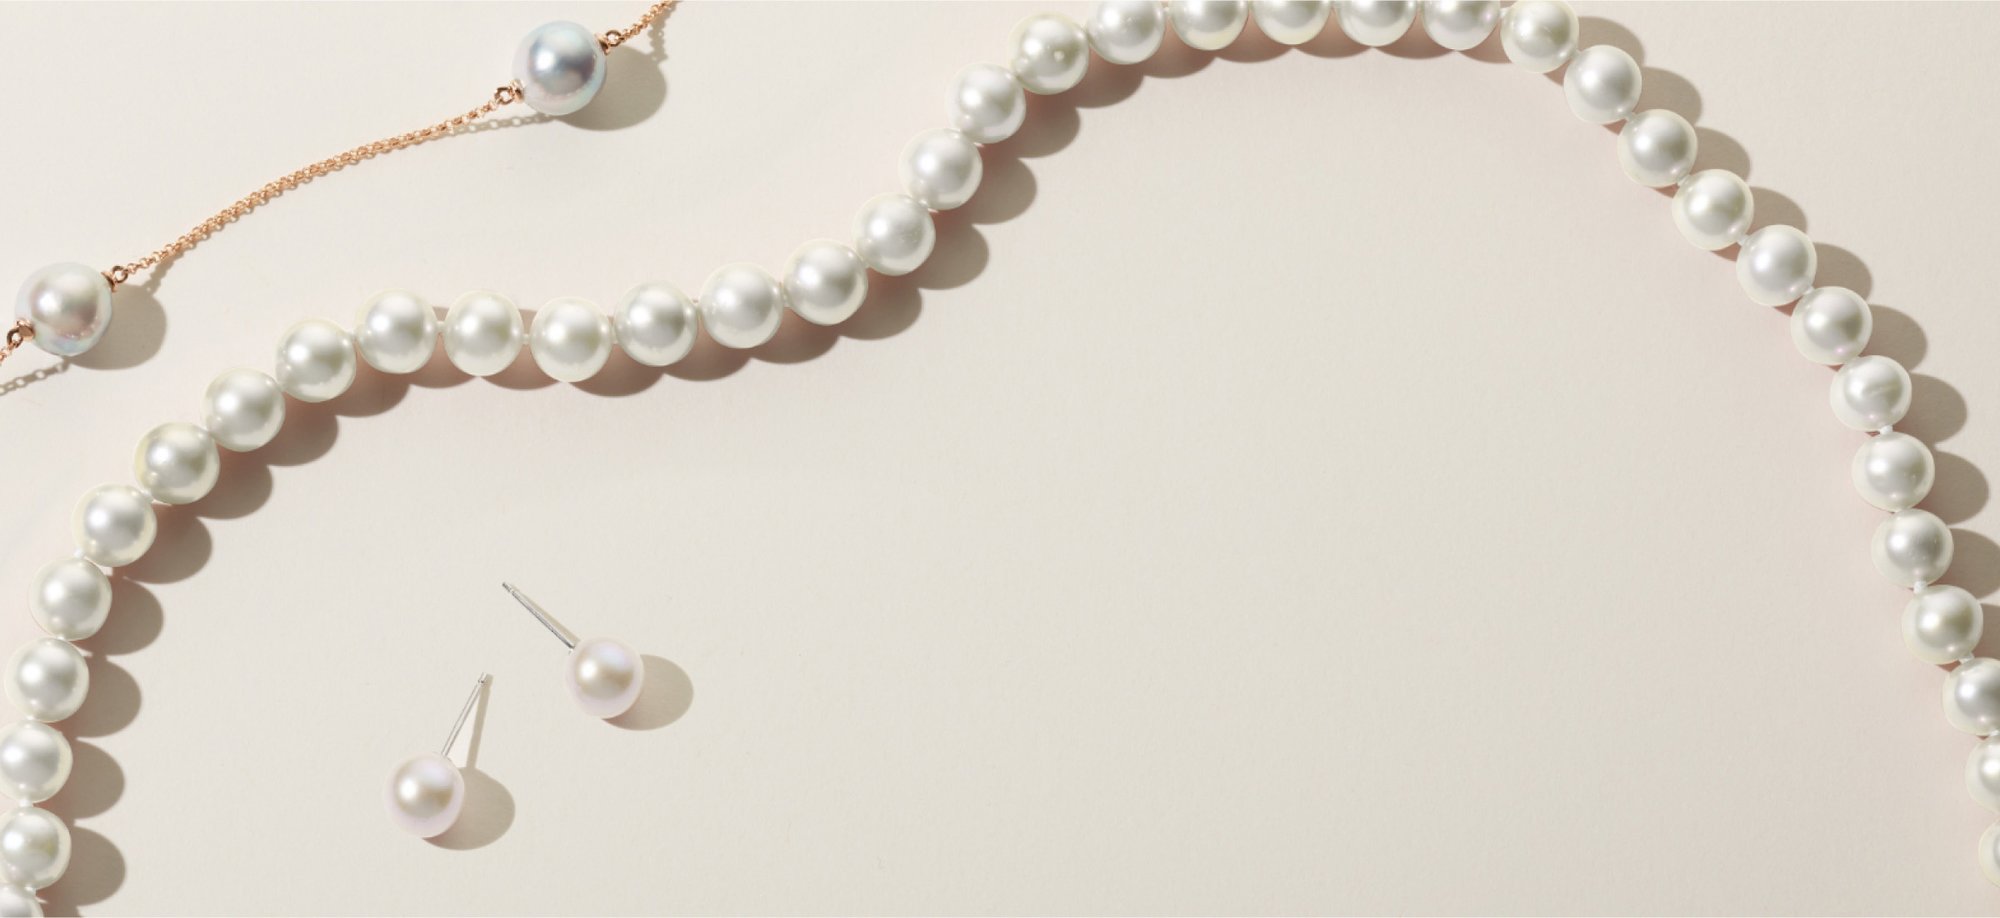 A string of pearls, a yellow chain with pearl accents, and a pair of pearl studs